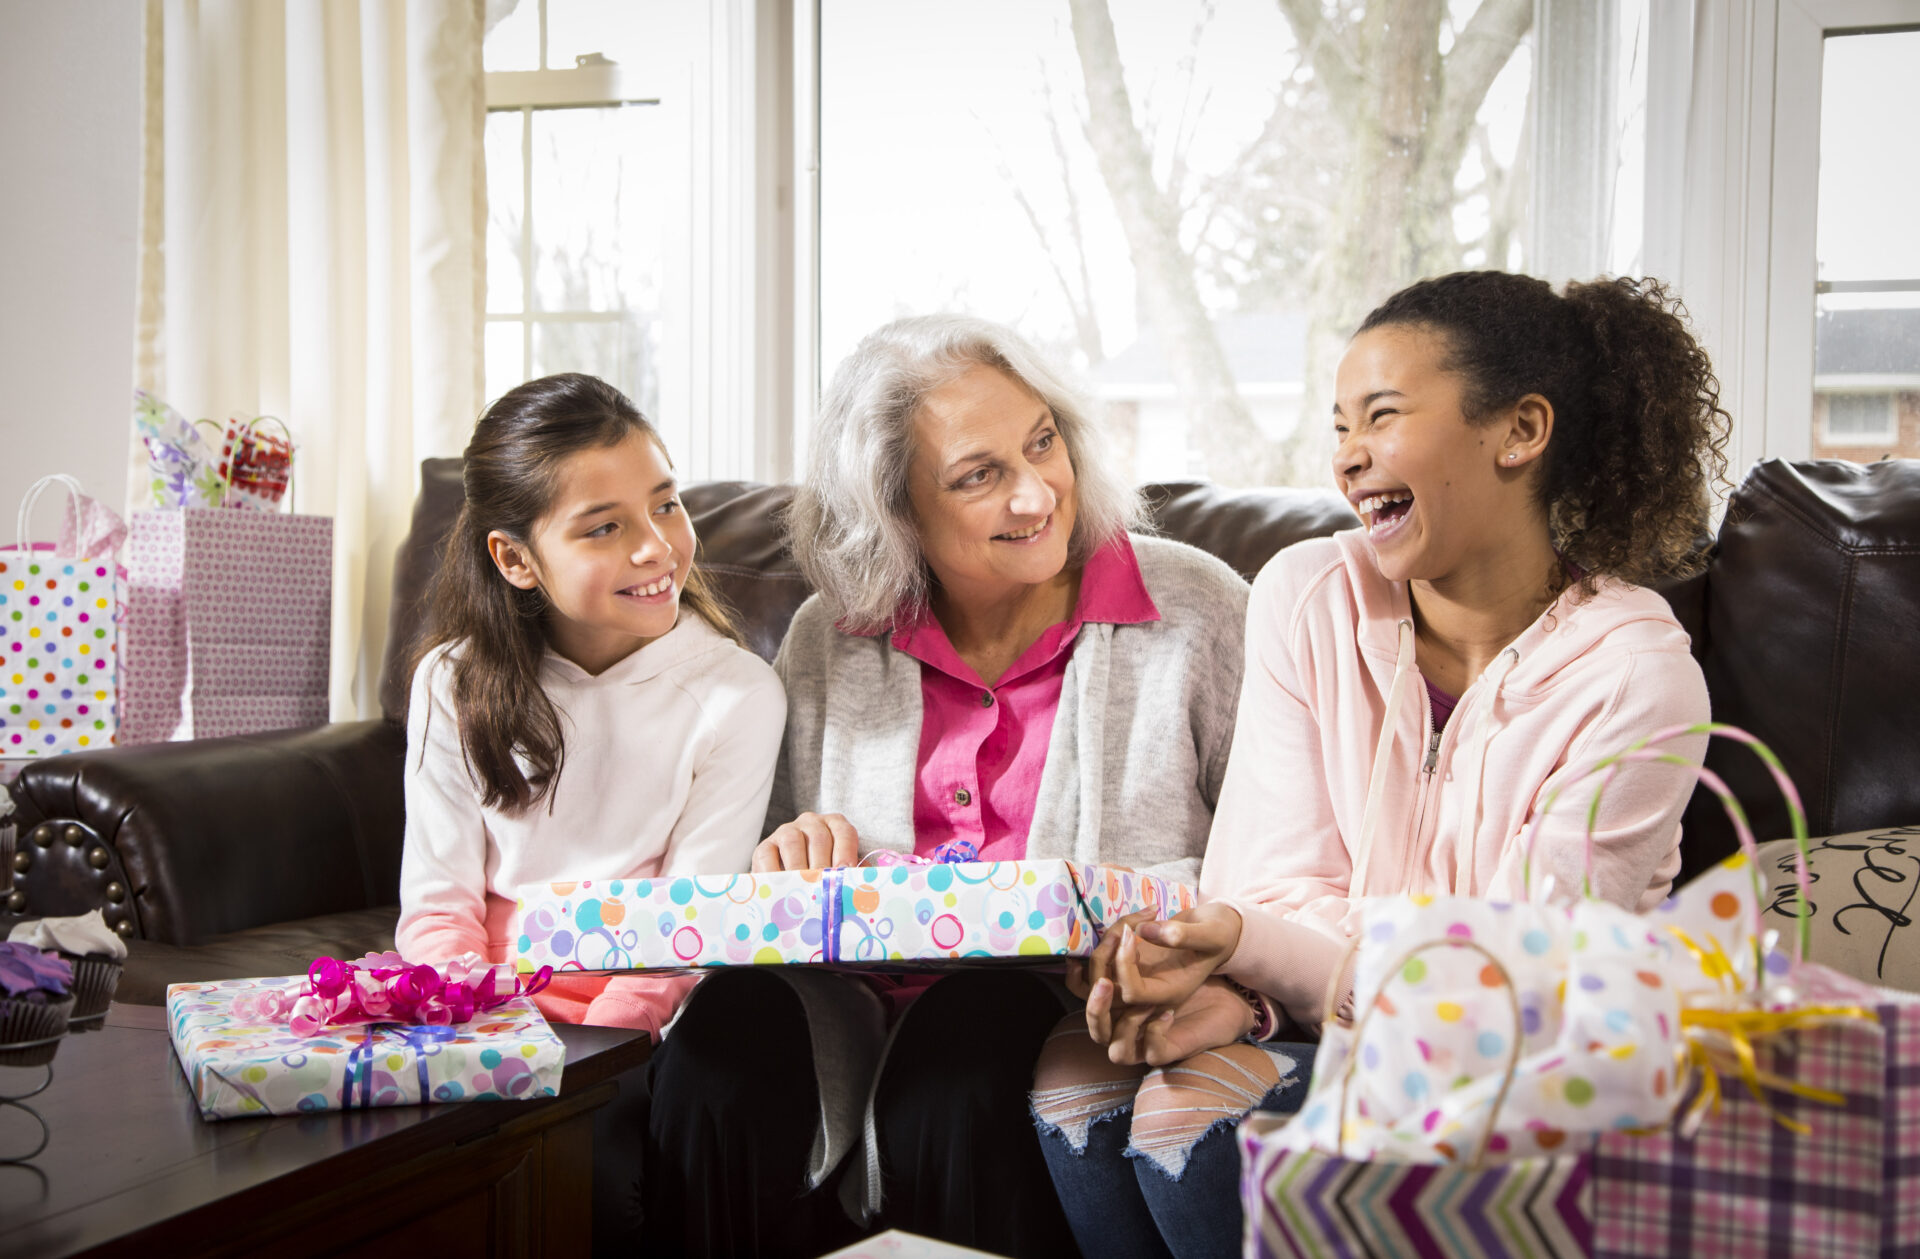 An elderly woman opening gifts with two girls